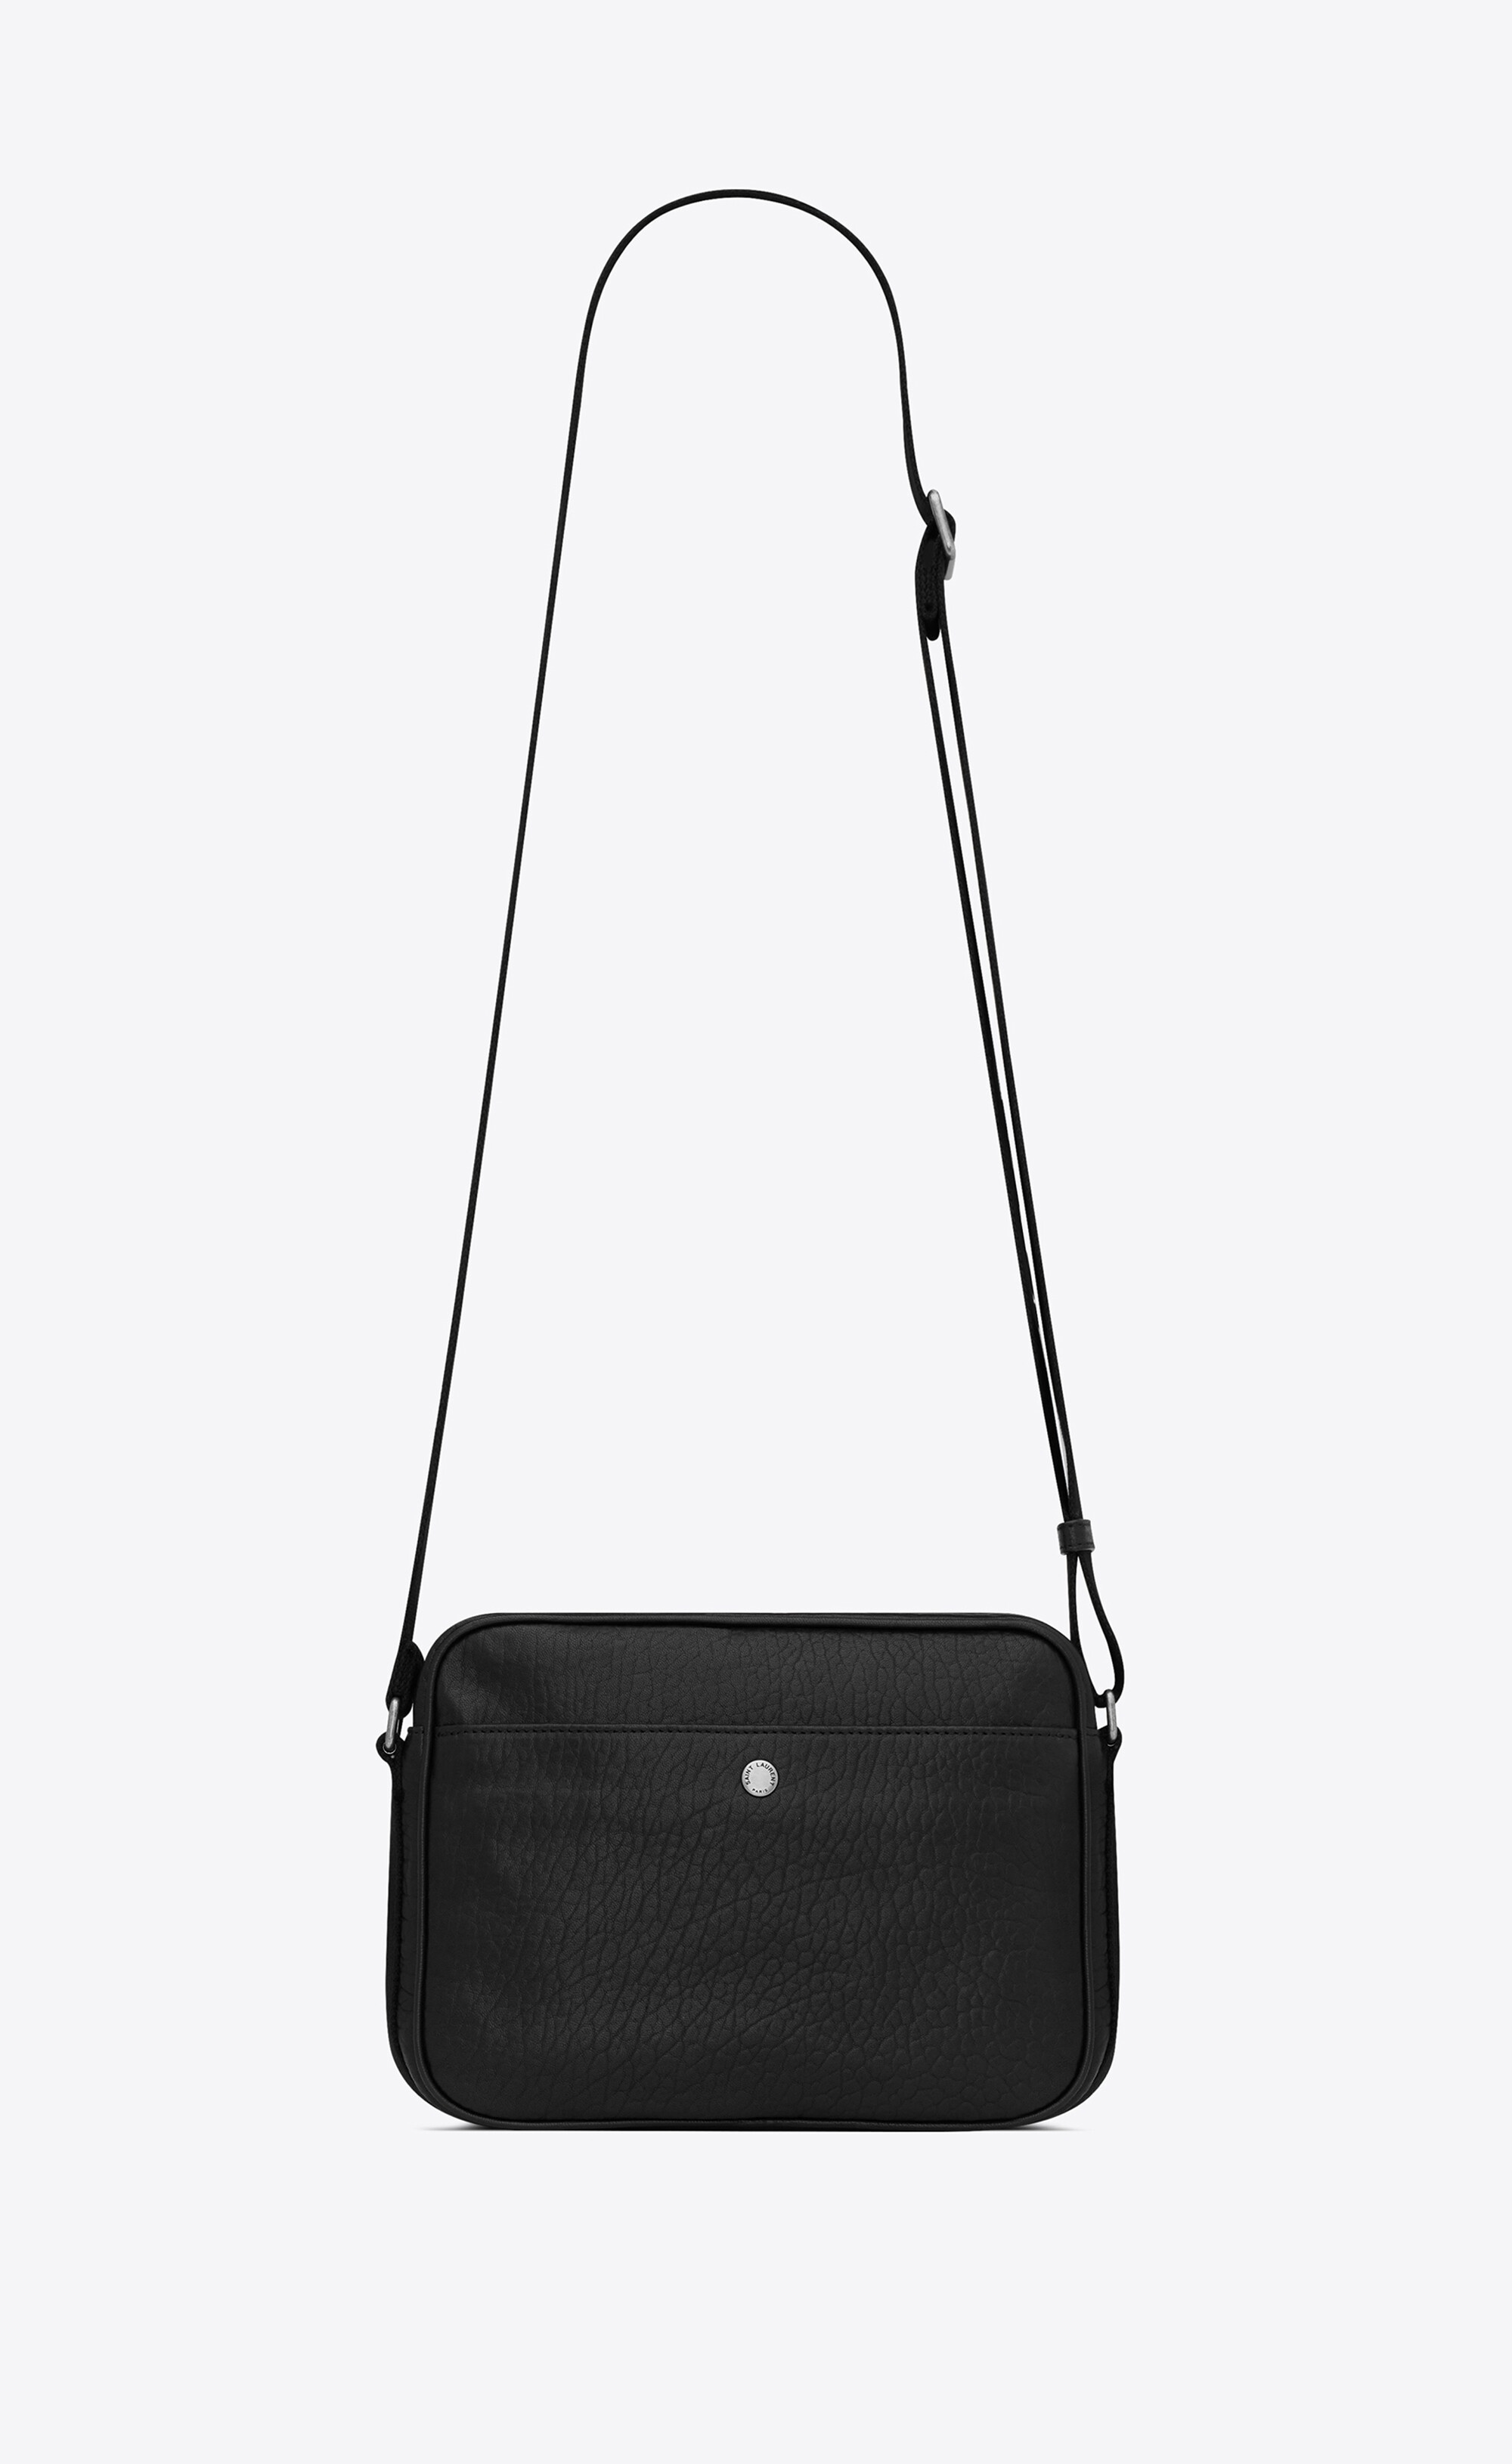 city saint laurent camera bag in grained leather - 2